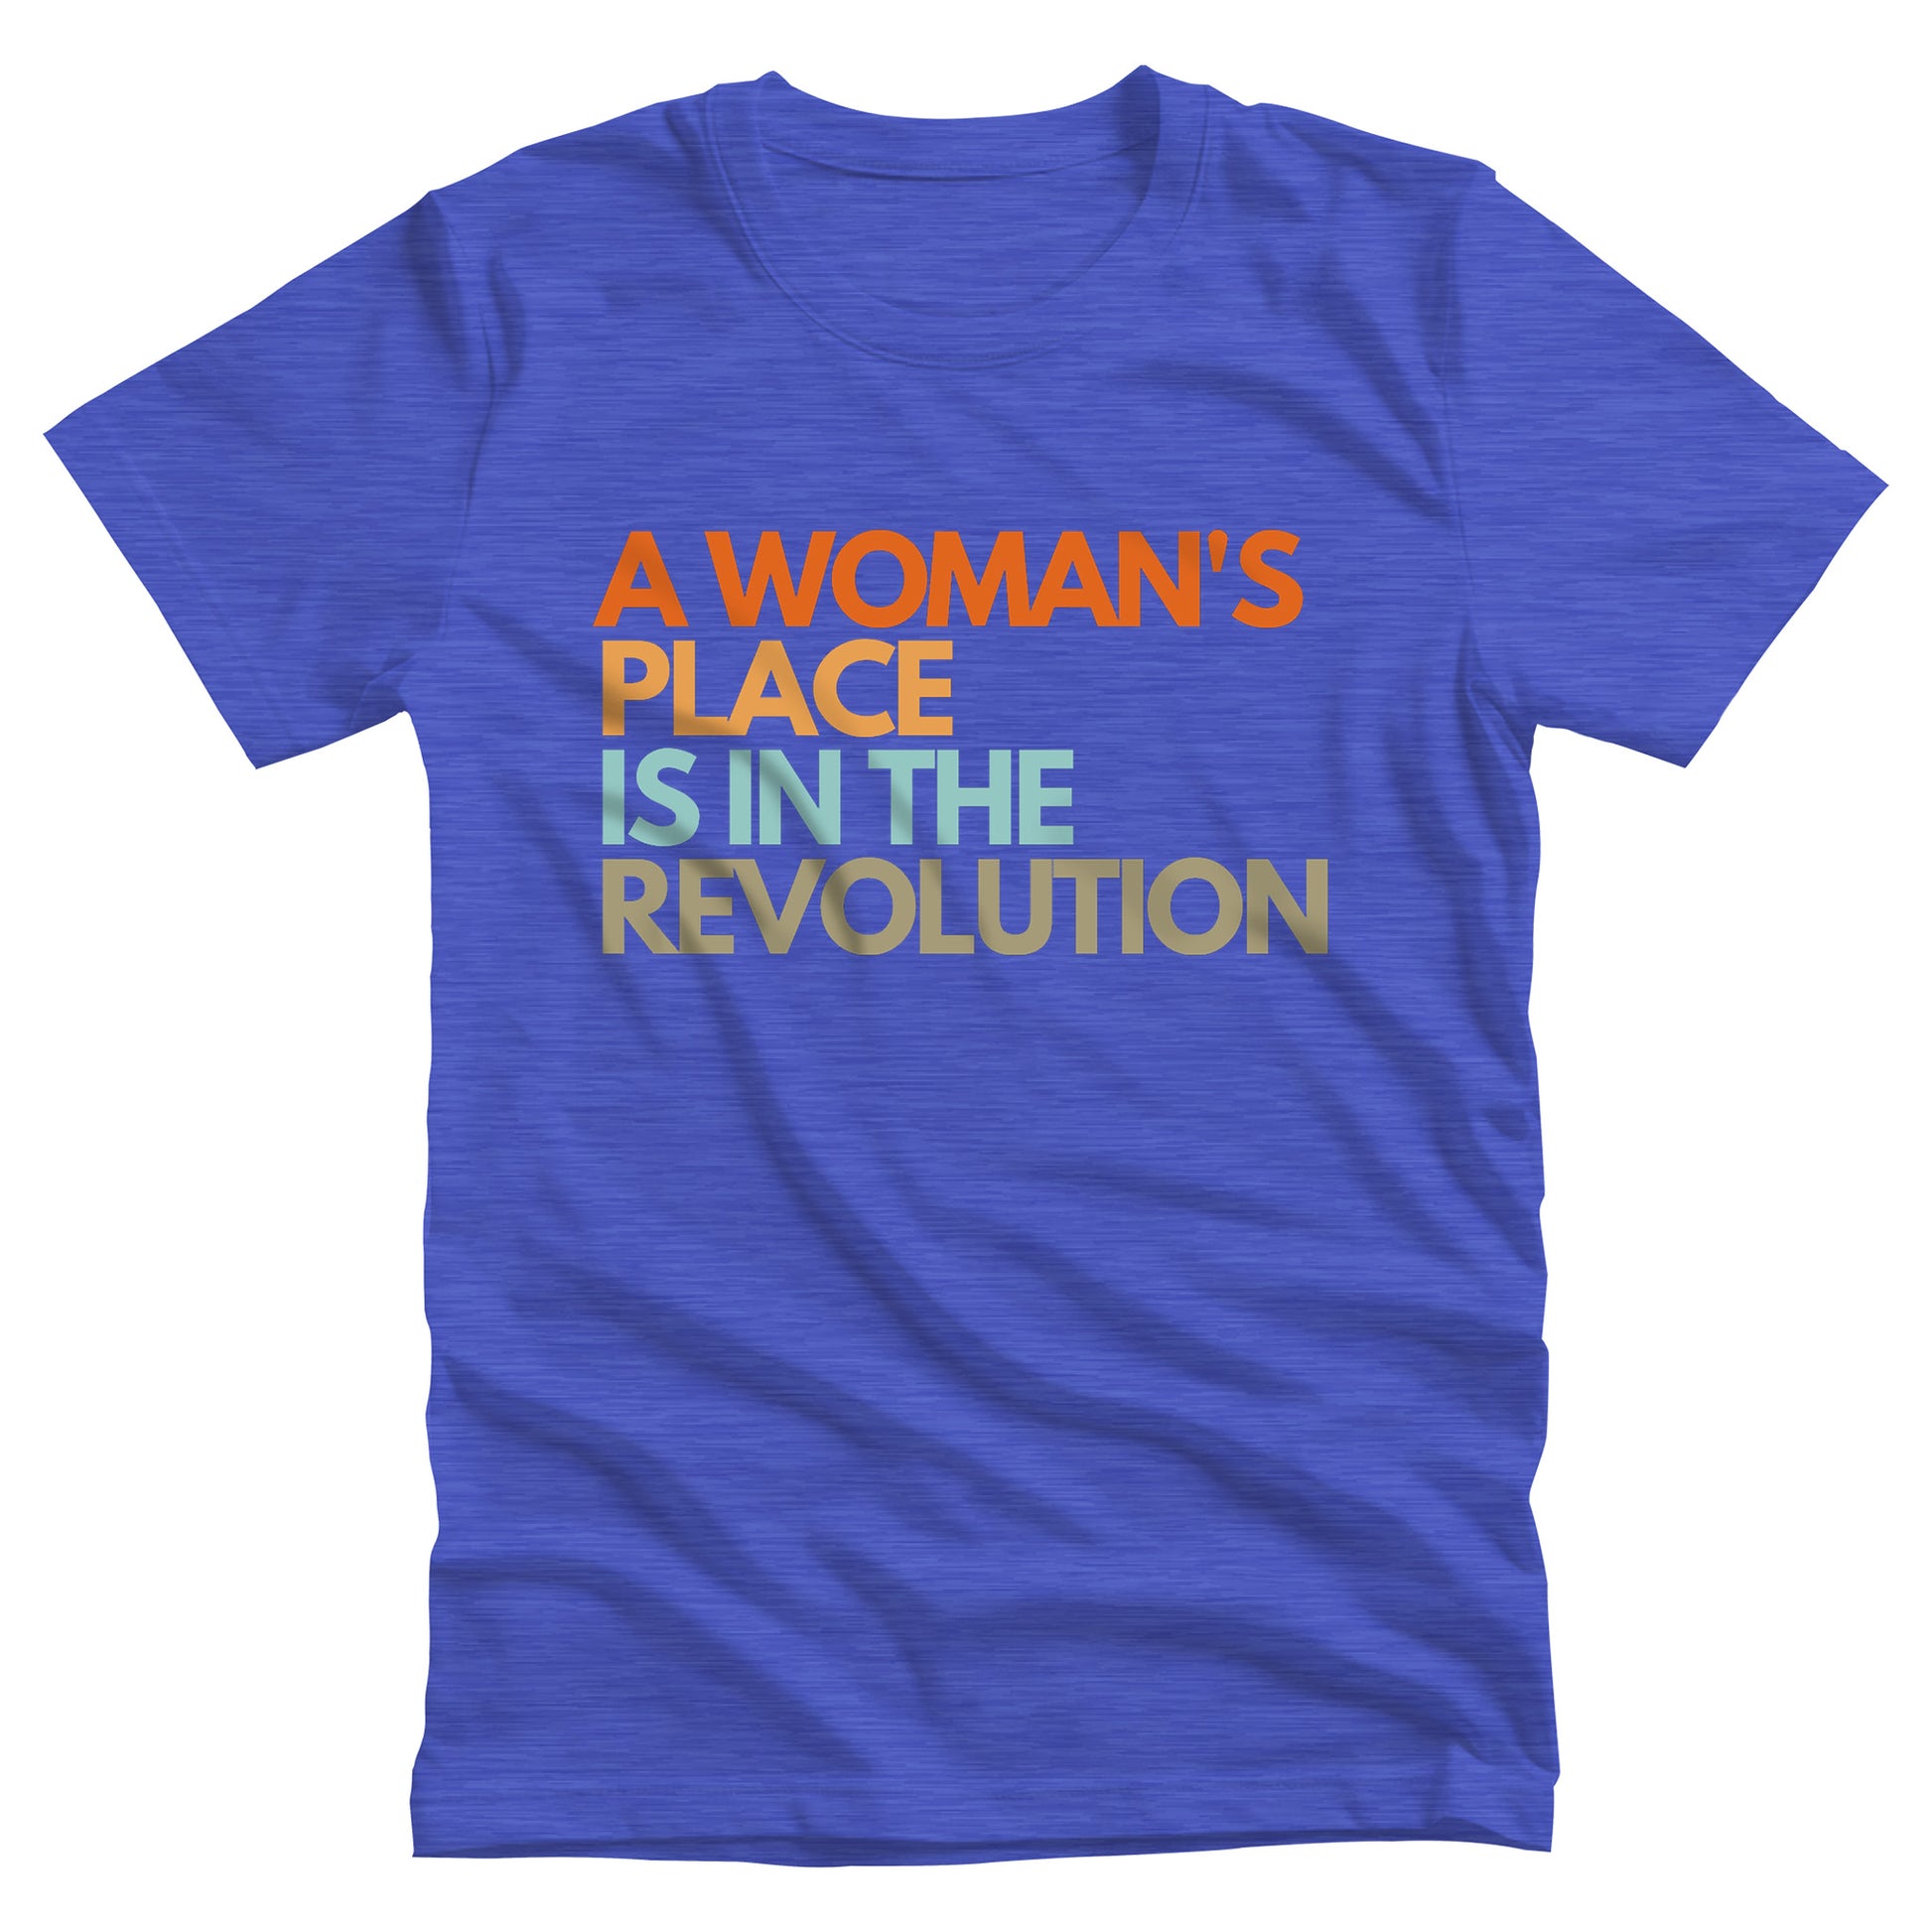 Heather True Royal color unisex t-shirt that says “A woman’s place is in the revolution” in a round, modern font in all caps and left aligned. Each line is a different color. “A Woman’s” is orange, “place” is yellow-orange, “is in the” is light blue, and “revolution” is military green.